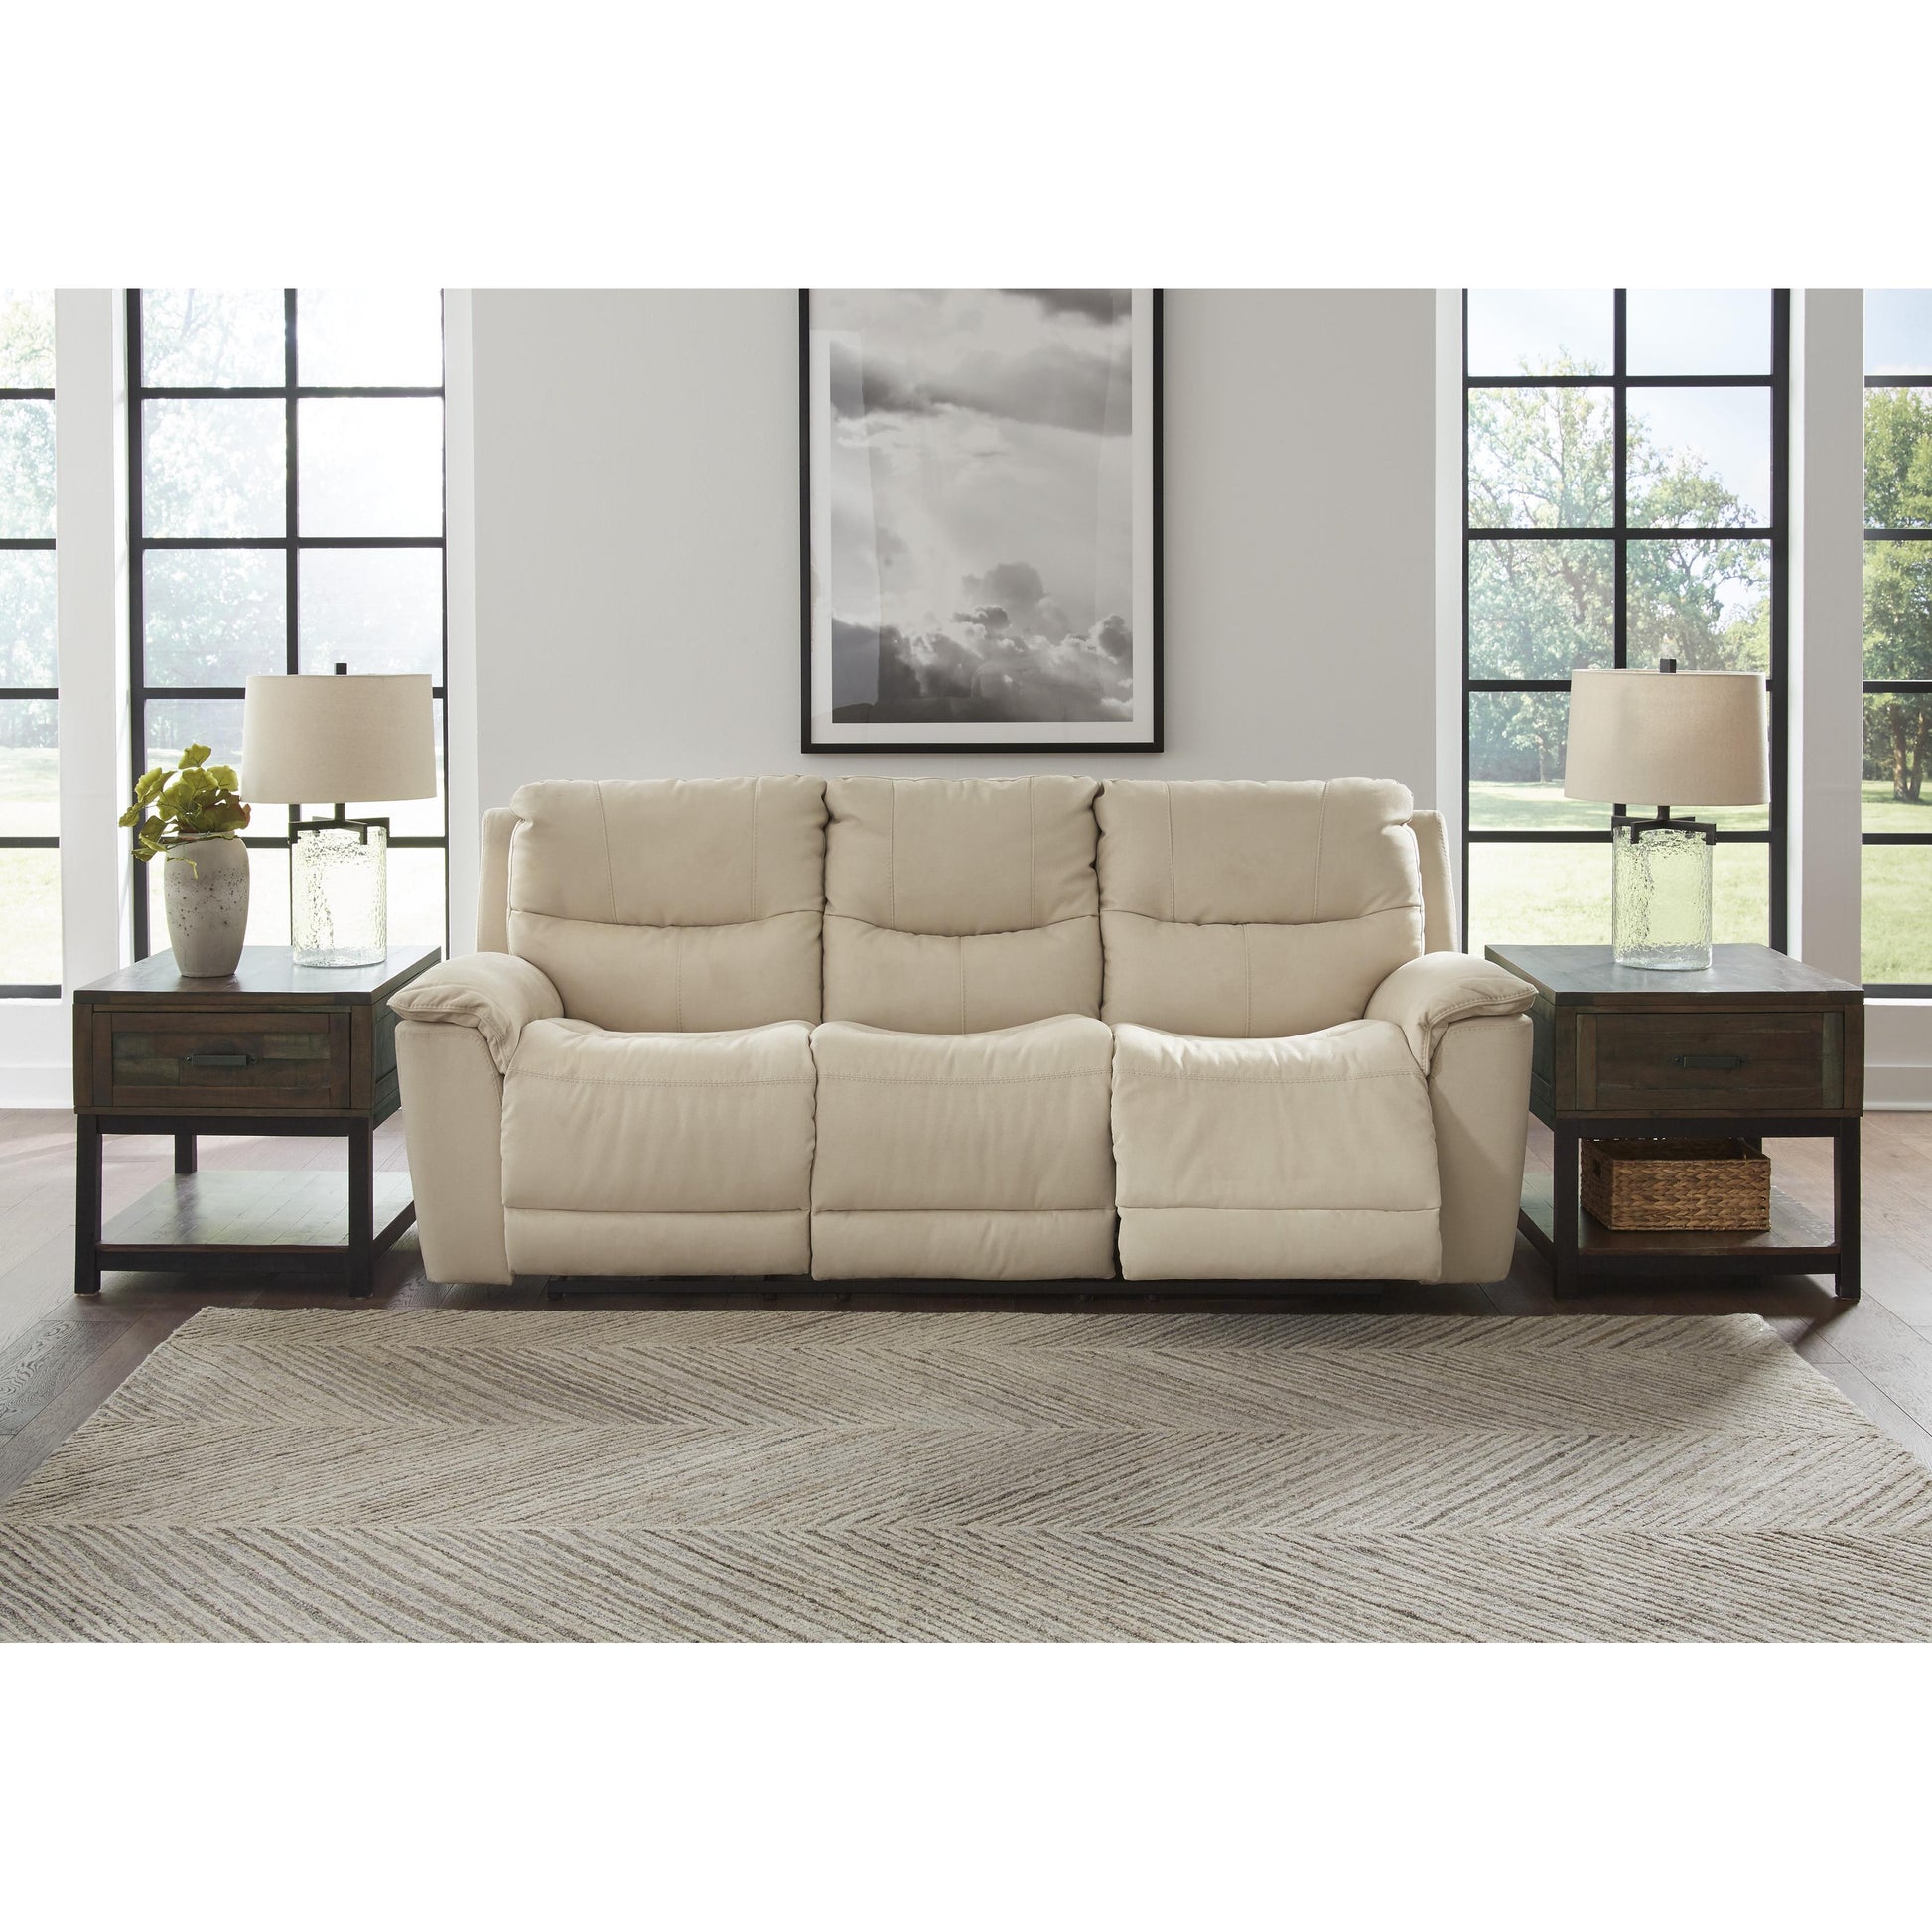 Signature Design by Ashley Next-Gen Gaucho Power Reclining Leather Look Sofa 6080715 IMAGE 5